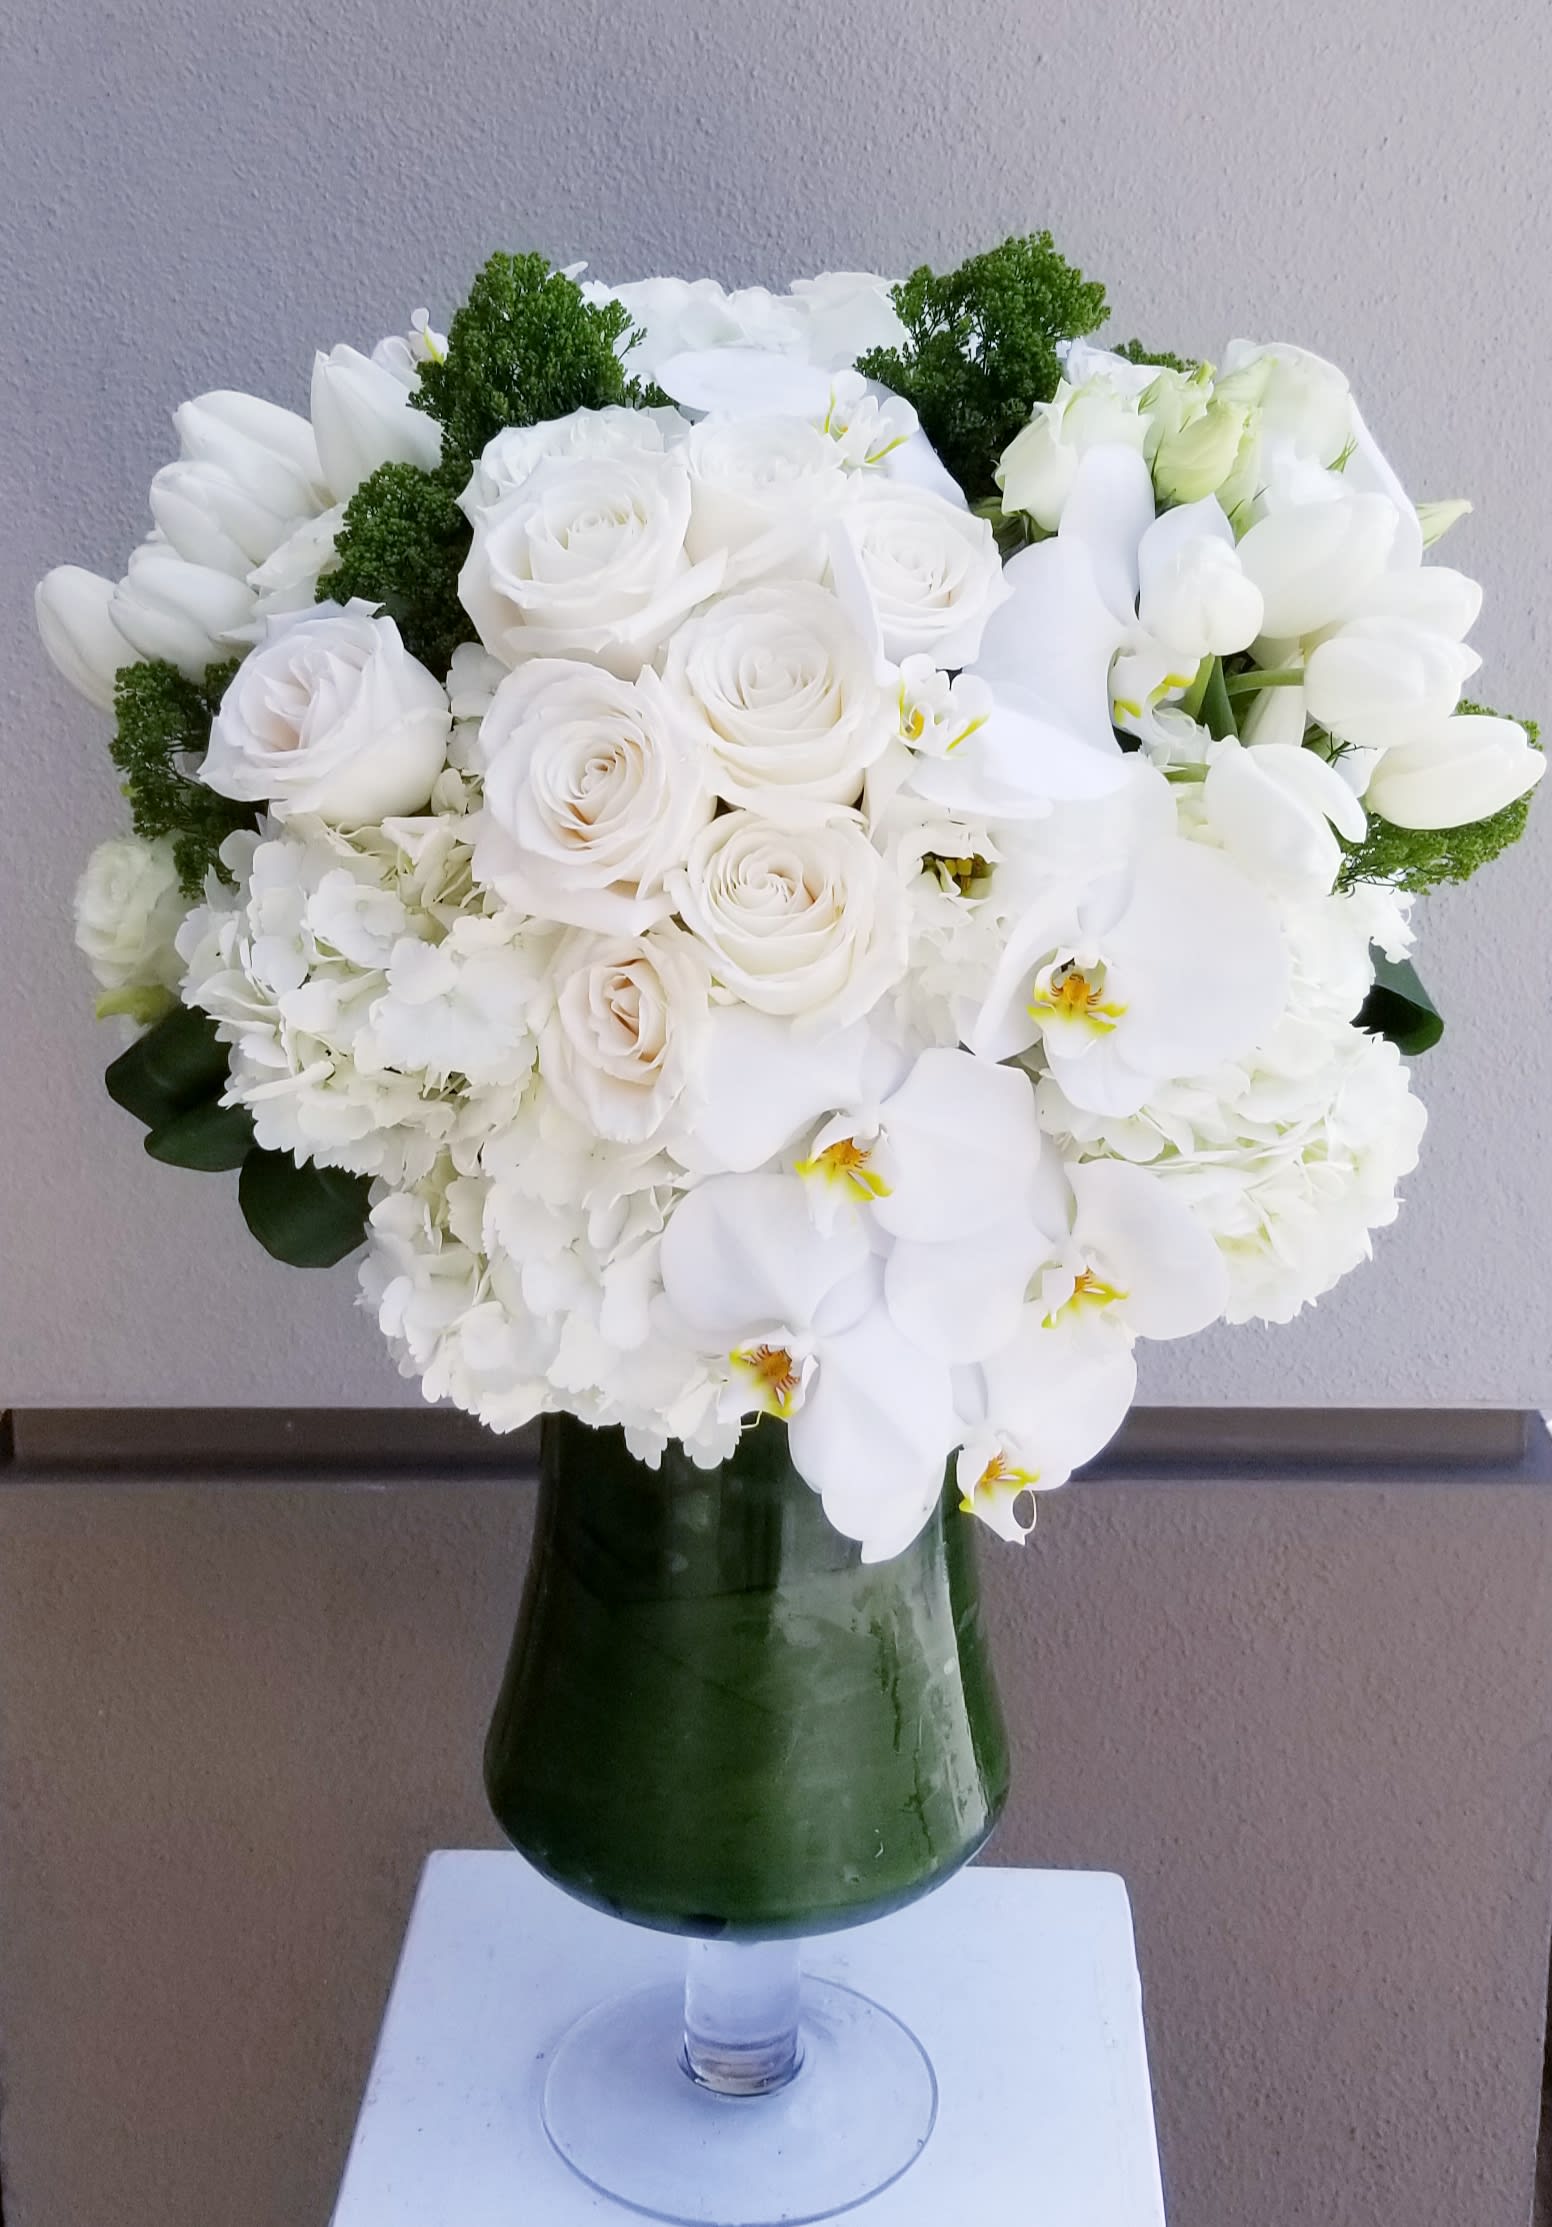 Blanca - Elegant arrangement in glass urn of all white premium blooms.It includes hydrangeas, roses, tulips and phalaenopsis orchids.